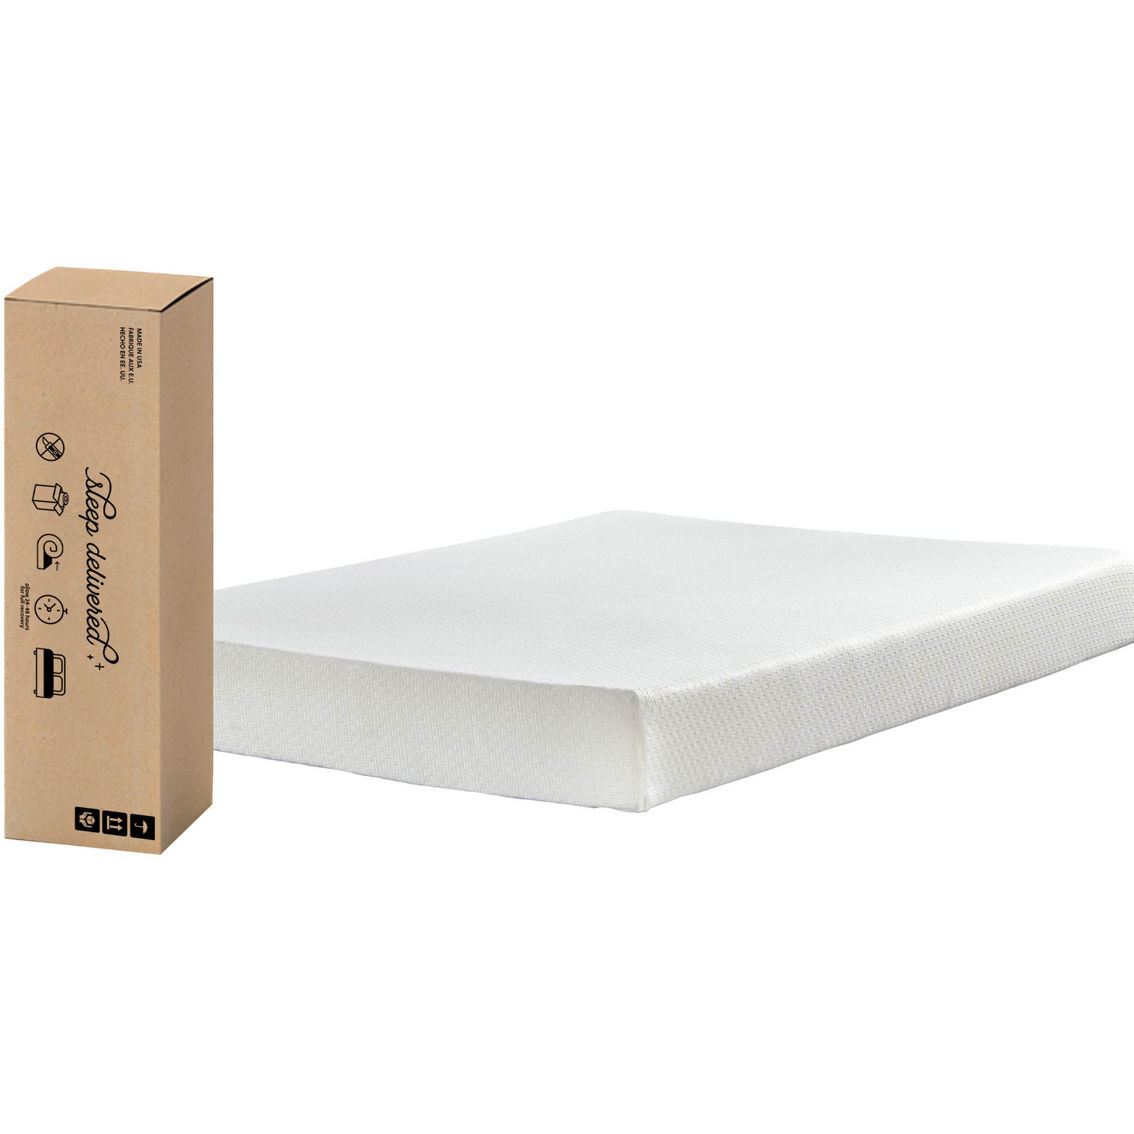 Ashley Chime Express 8 in. Mattress - Image 3 of 3